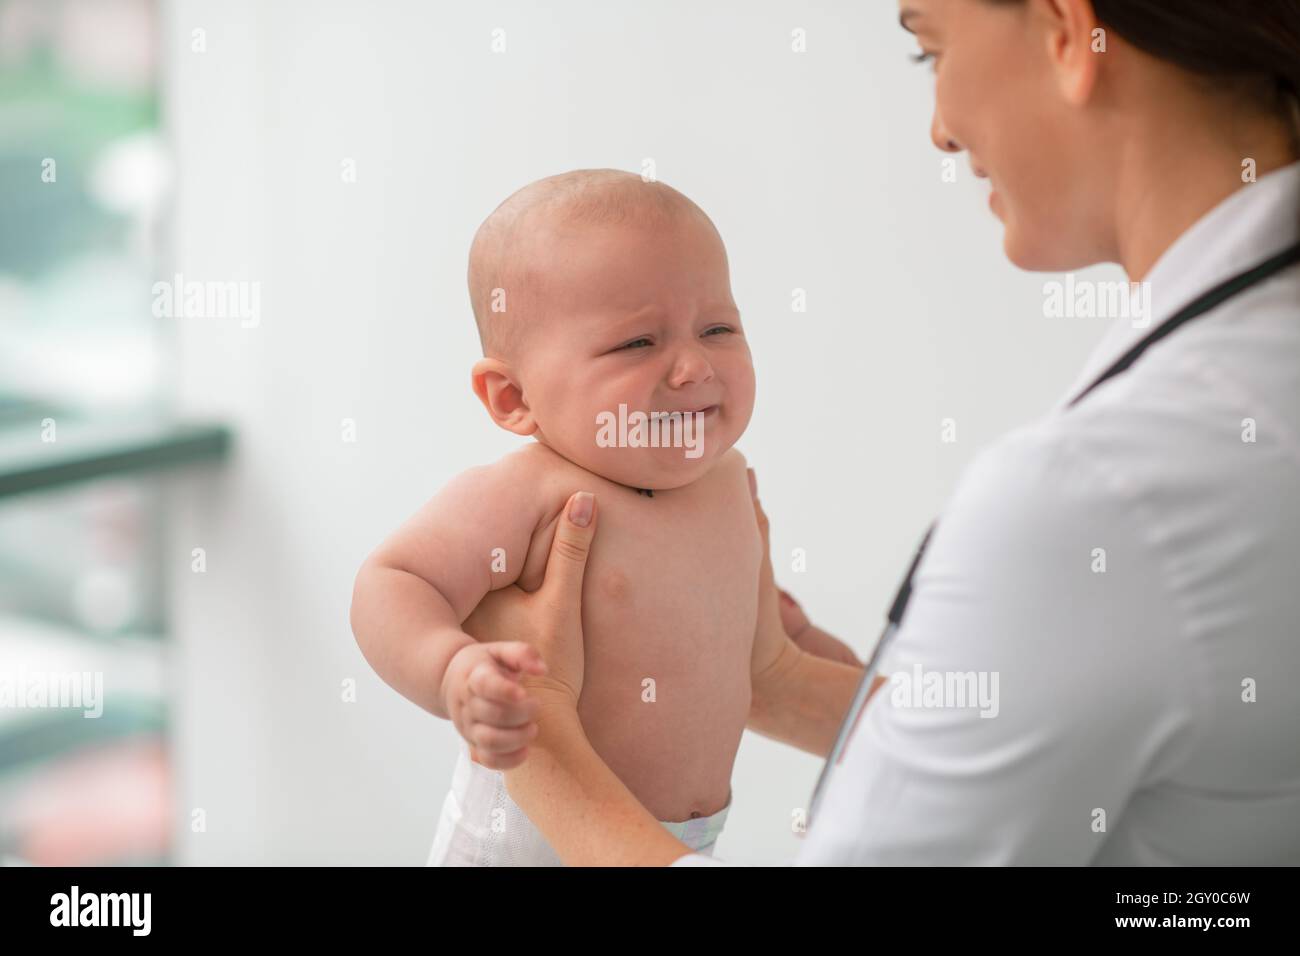 Attentive doctor examining a frightened pediatric patient Stock Photo